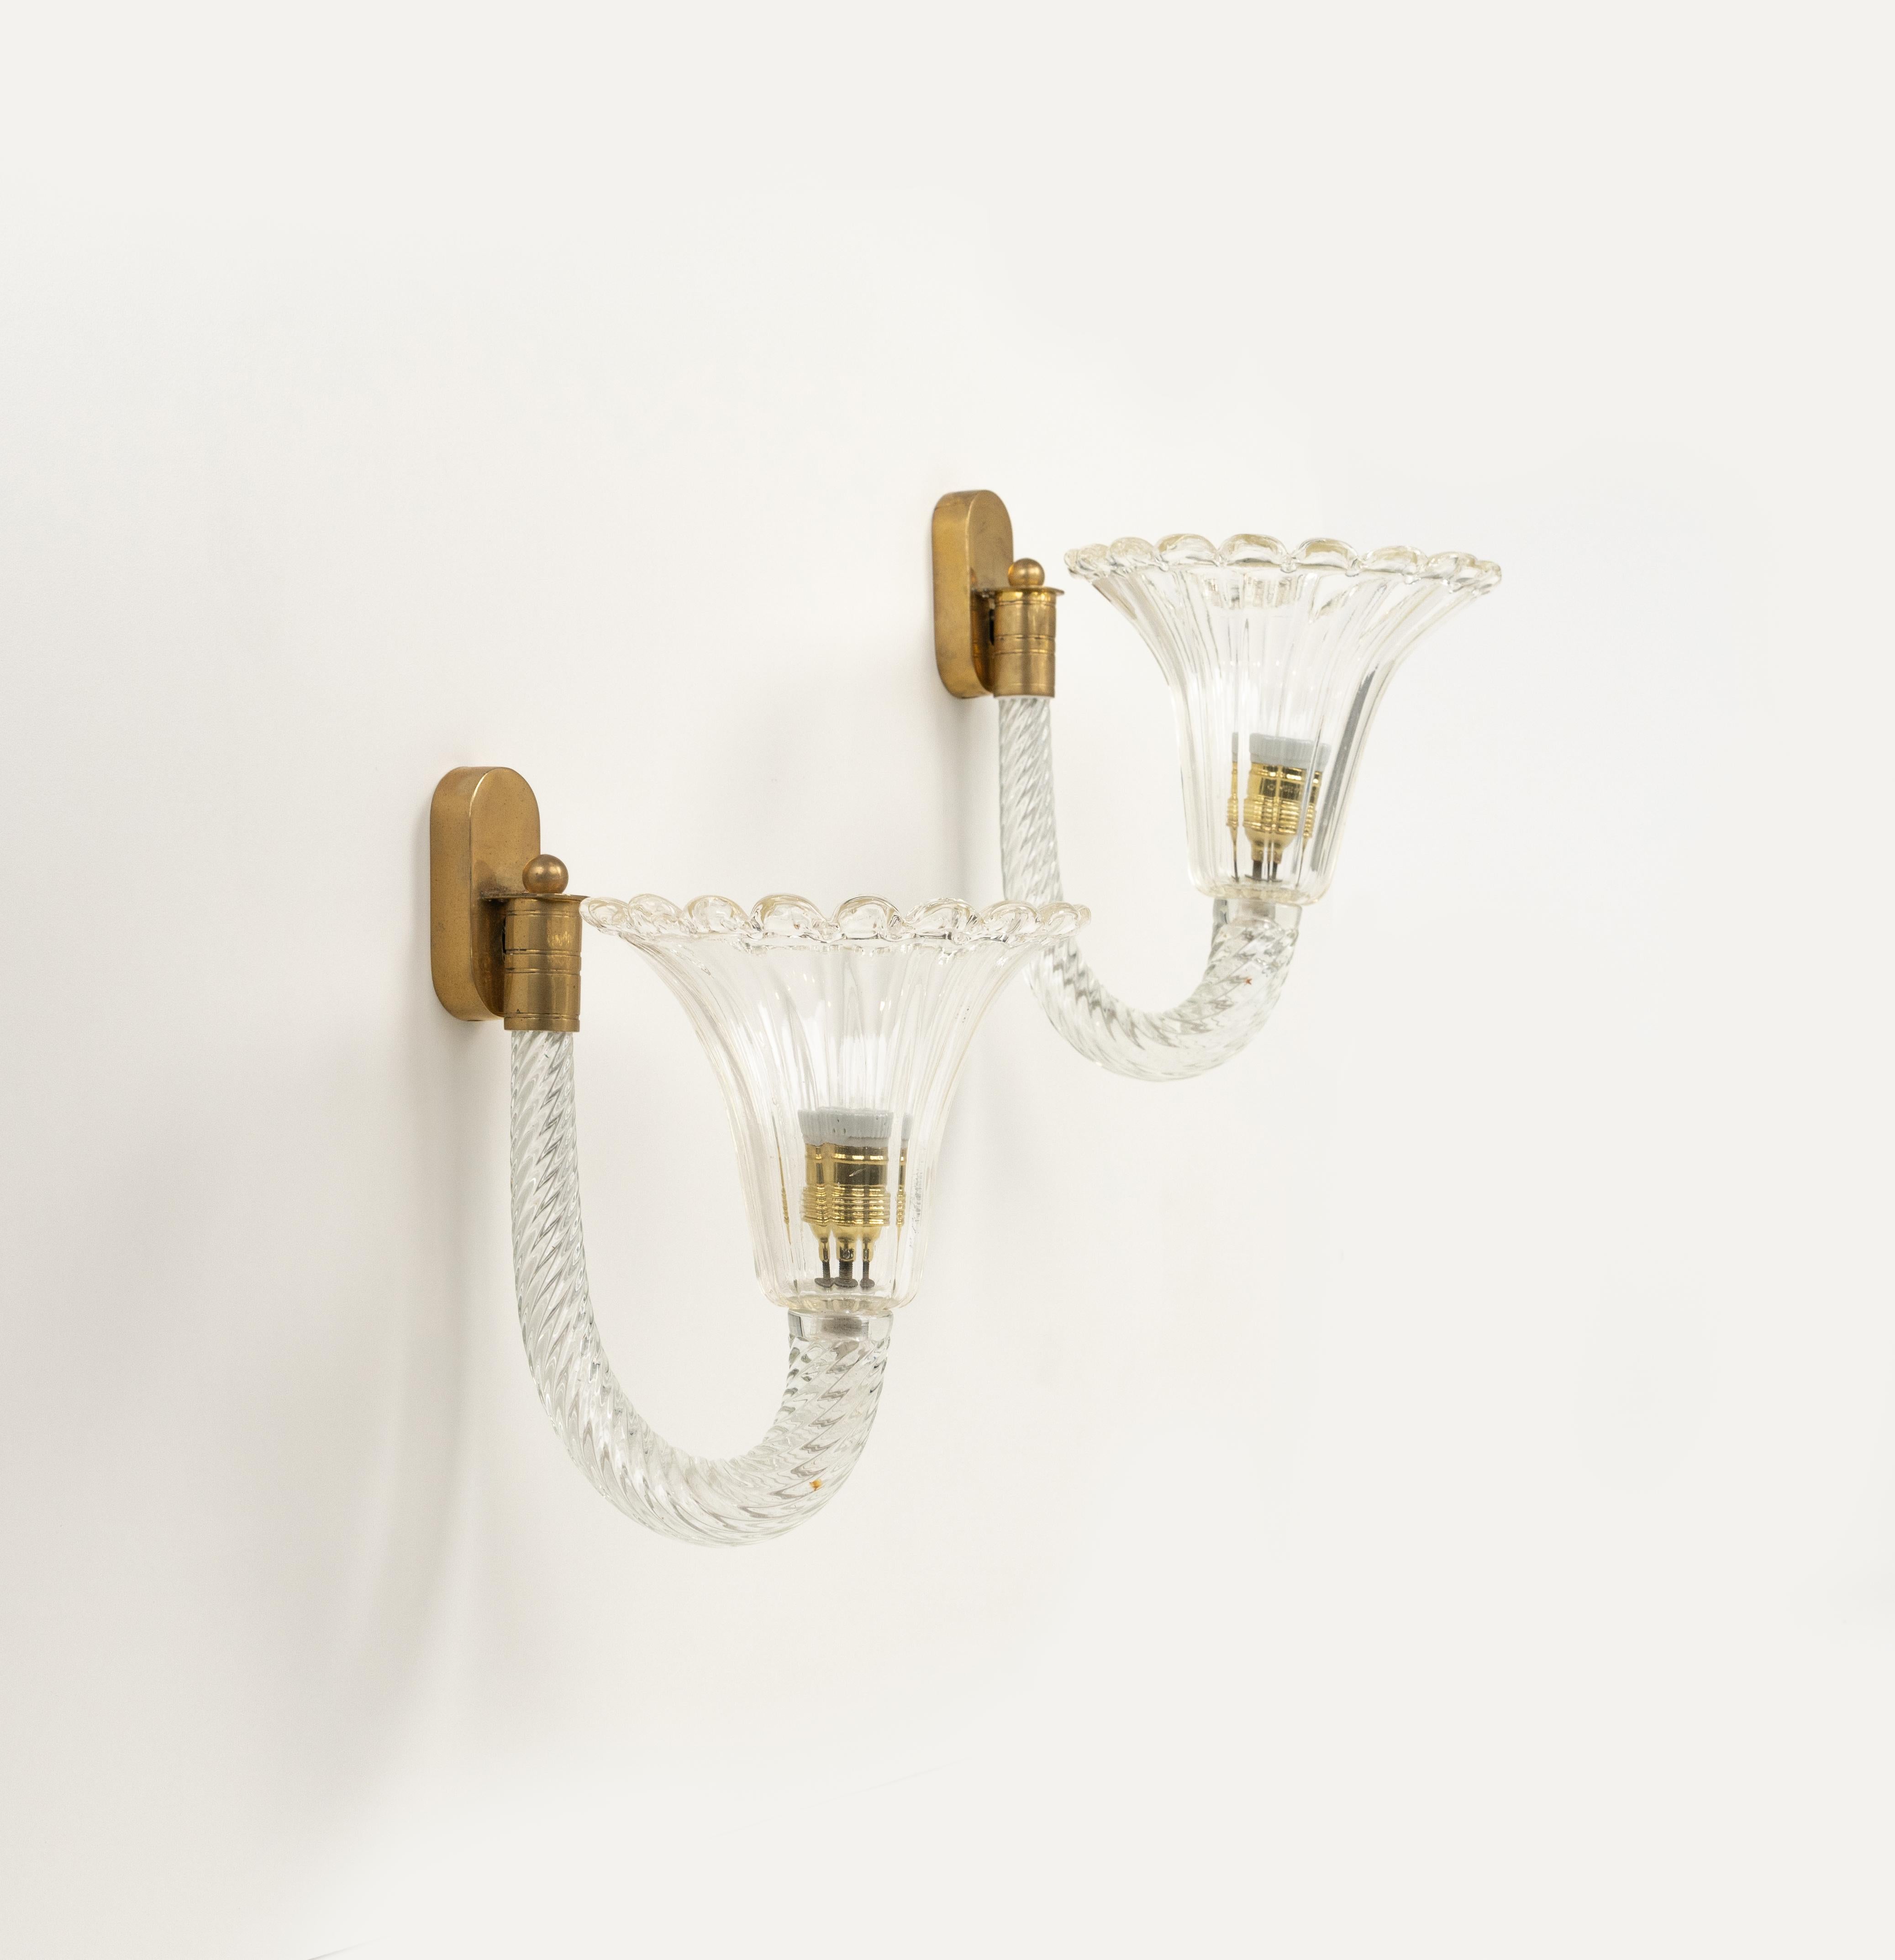 Midcentury beautiful pair of sconces in murano glass and brass in the style of Barovier & Toso.

Made in Italy (Venice) in the 1950s.

They are extremely decorative and can be used in any setting.

New electrical system, they are wired for the